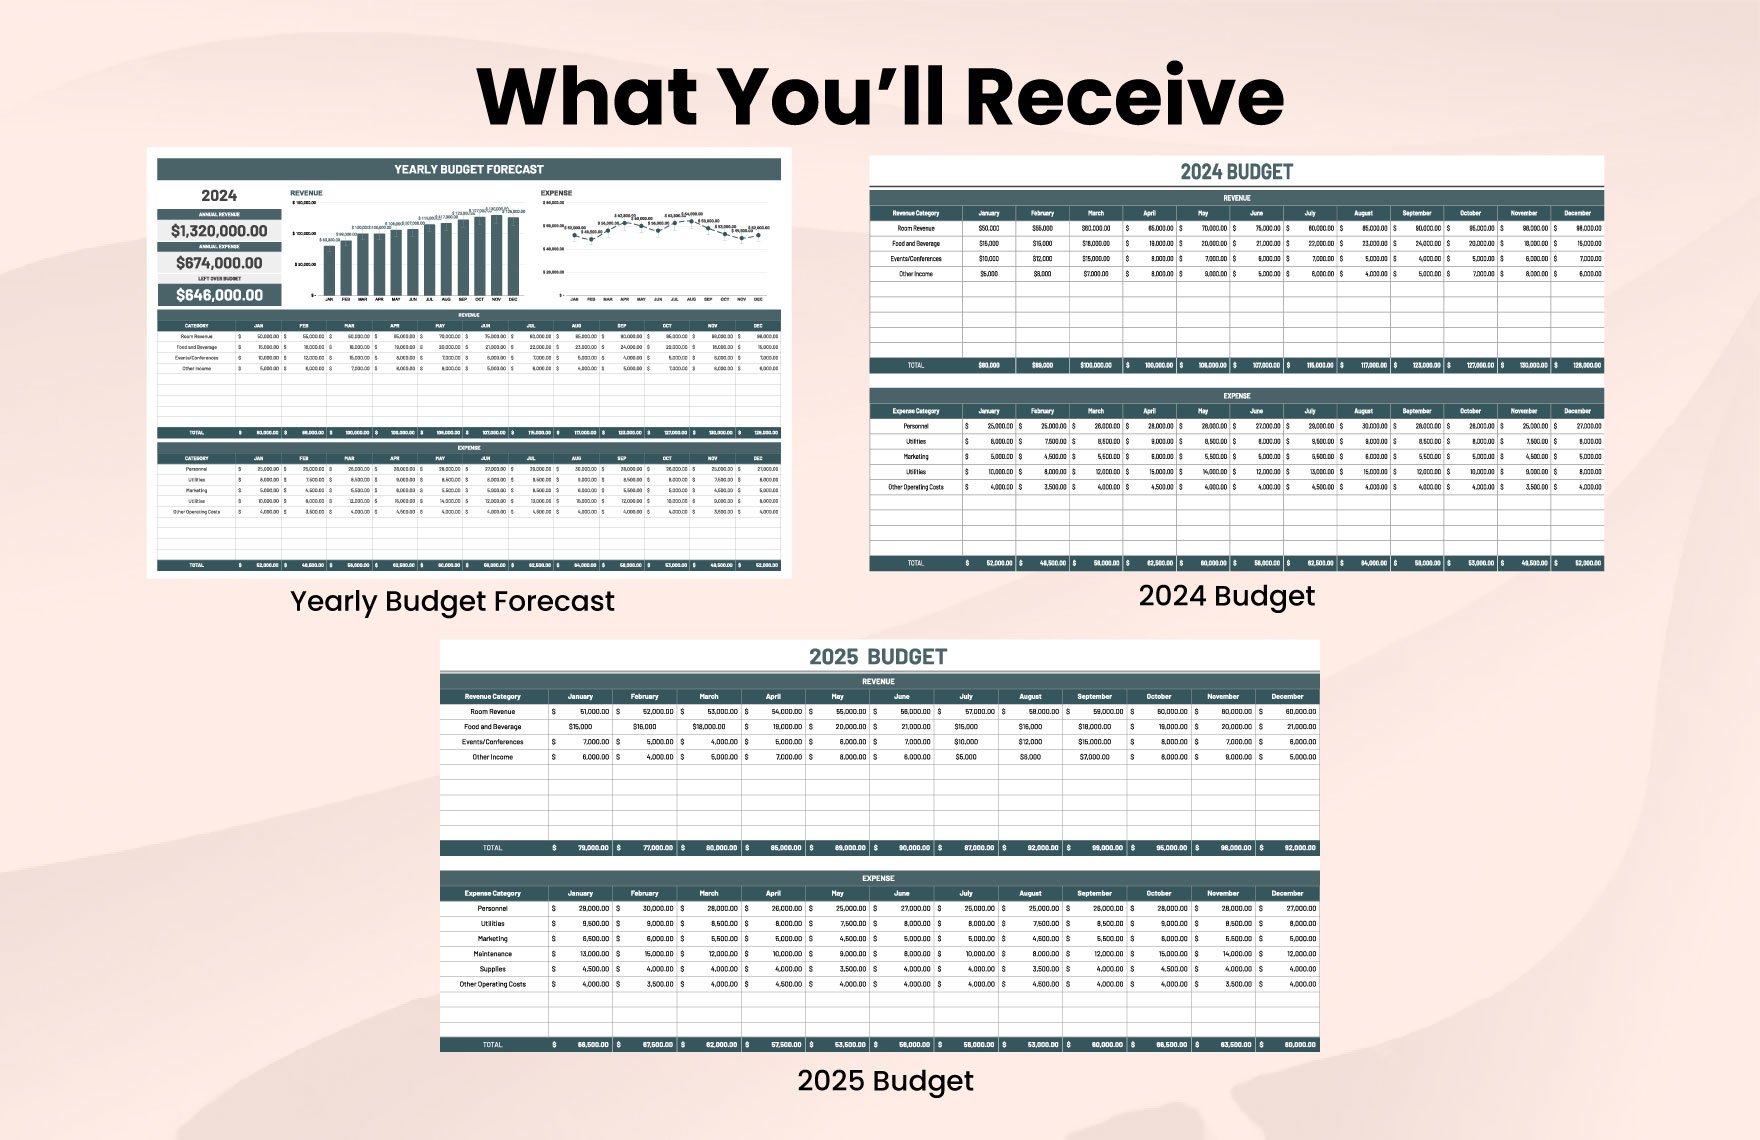 Yearly Budget Forecast Template